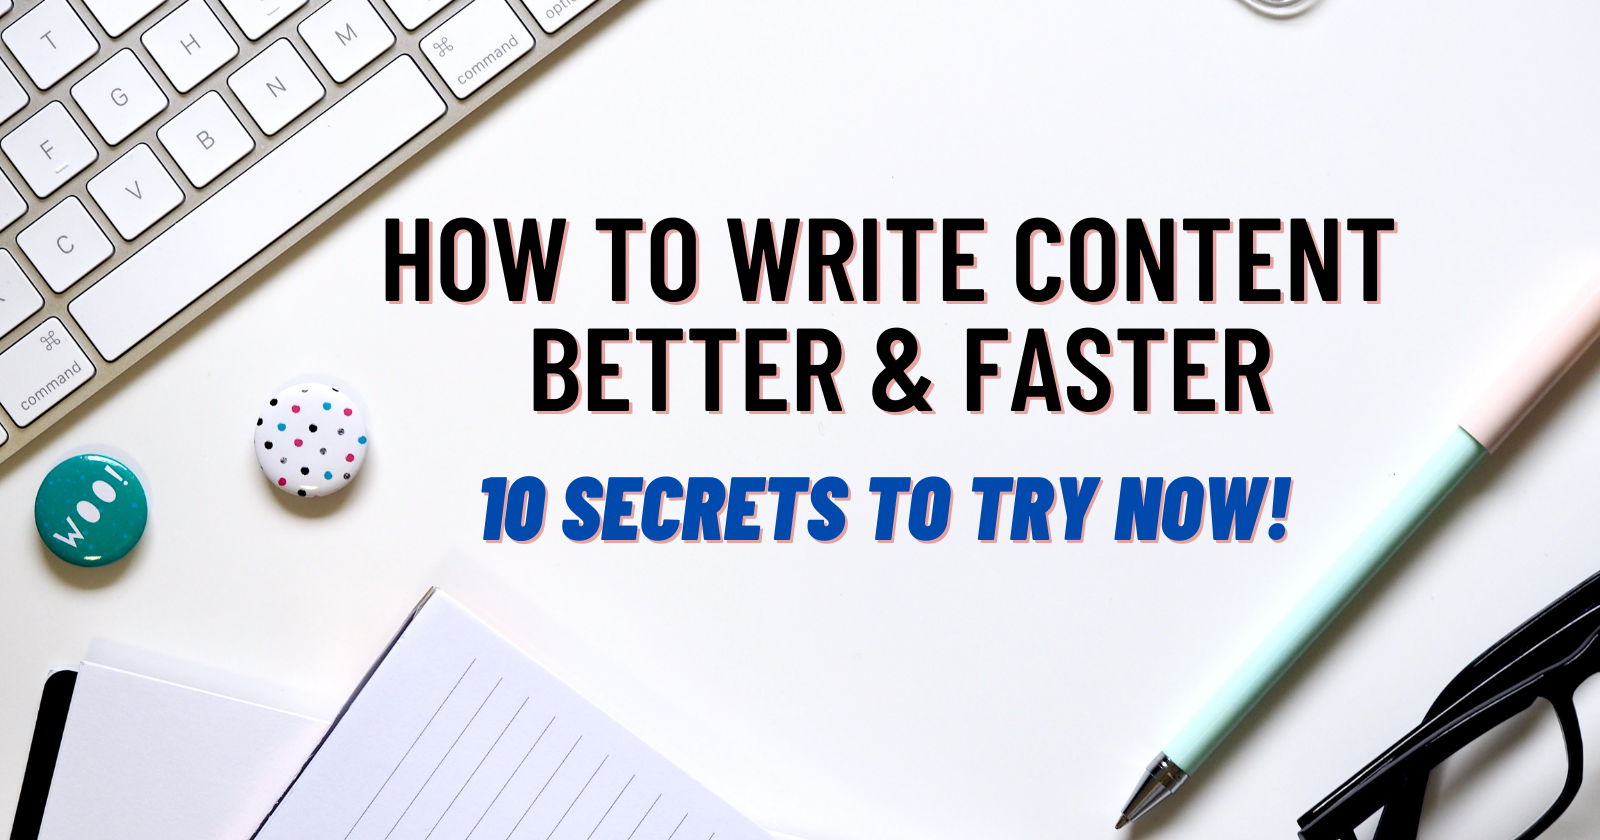 write-content-better-and-faster-5f68a718803f6.png